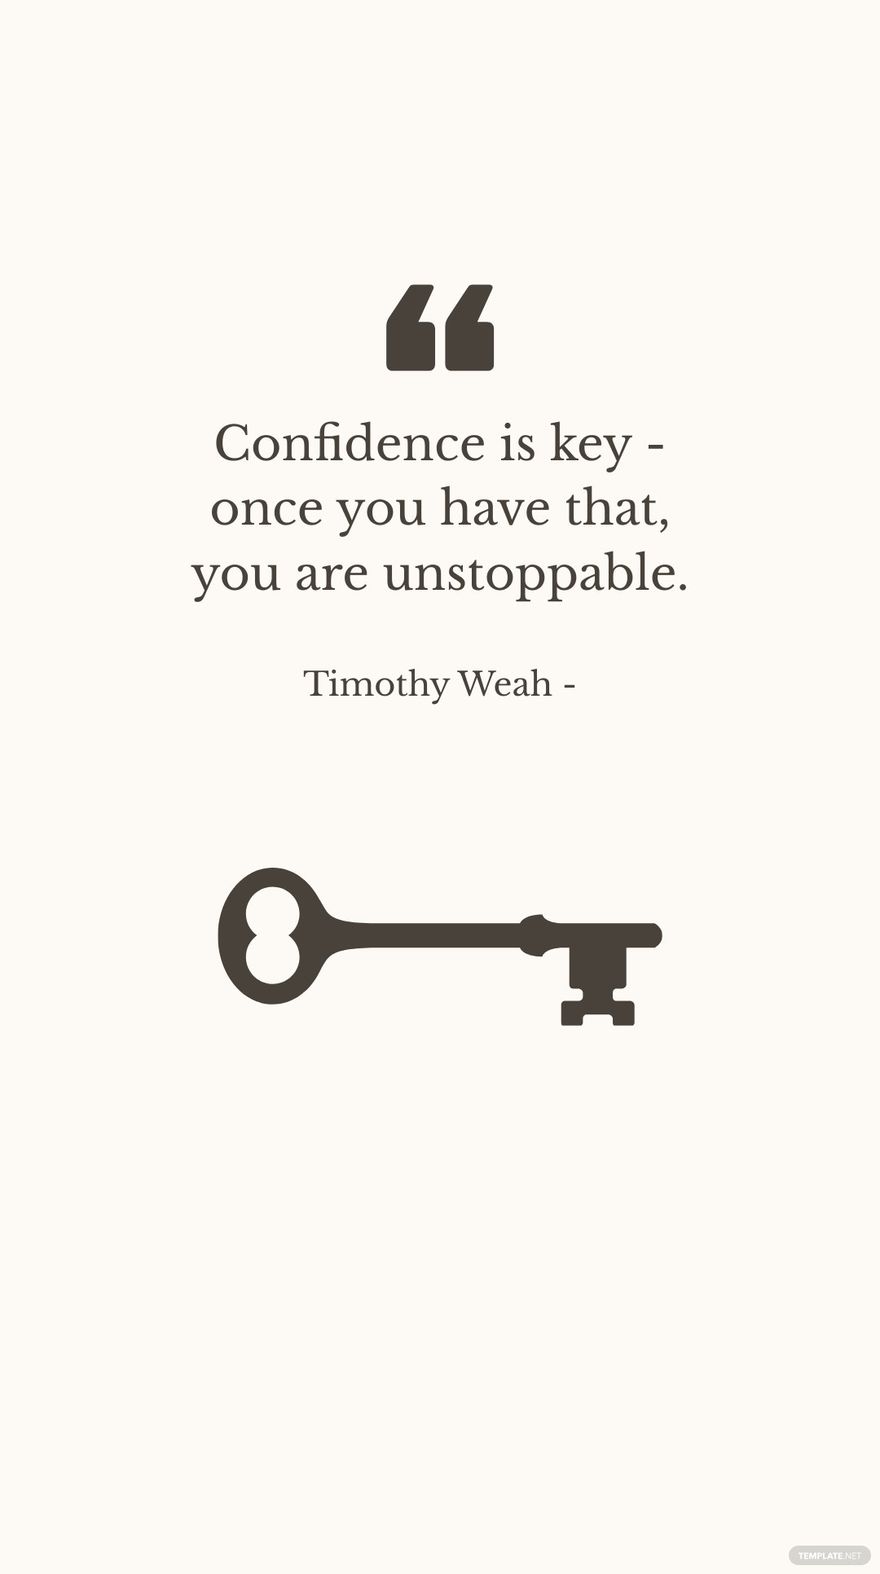 Free Timothy Weah - Confidence is key - once you have that, you are unstoppable. in JPG